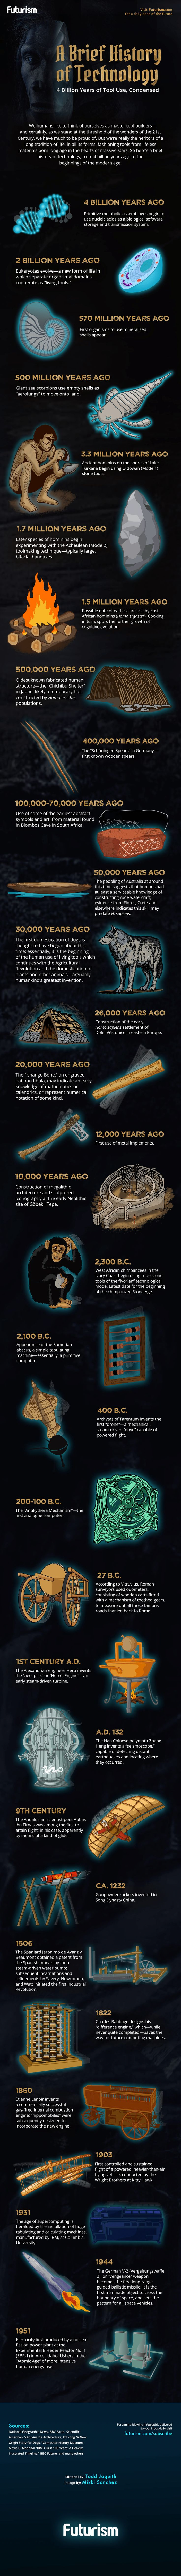 The Origin And Evolution Of Technology - Infographic